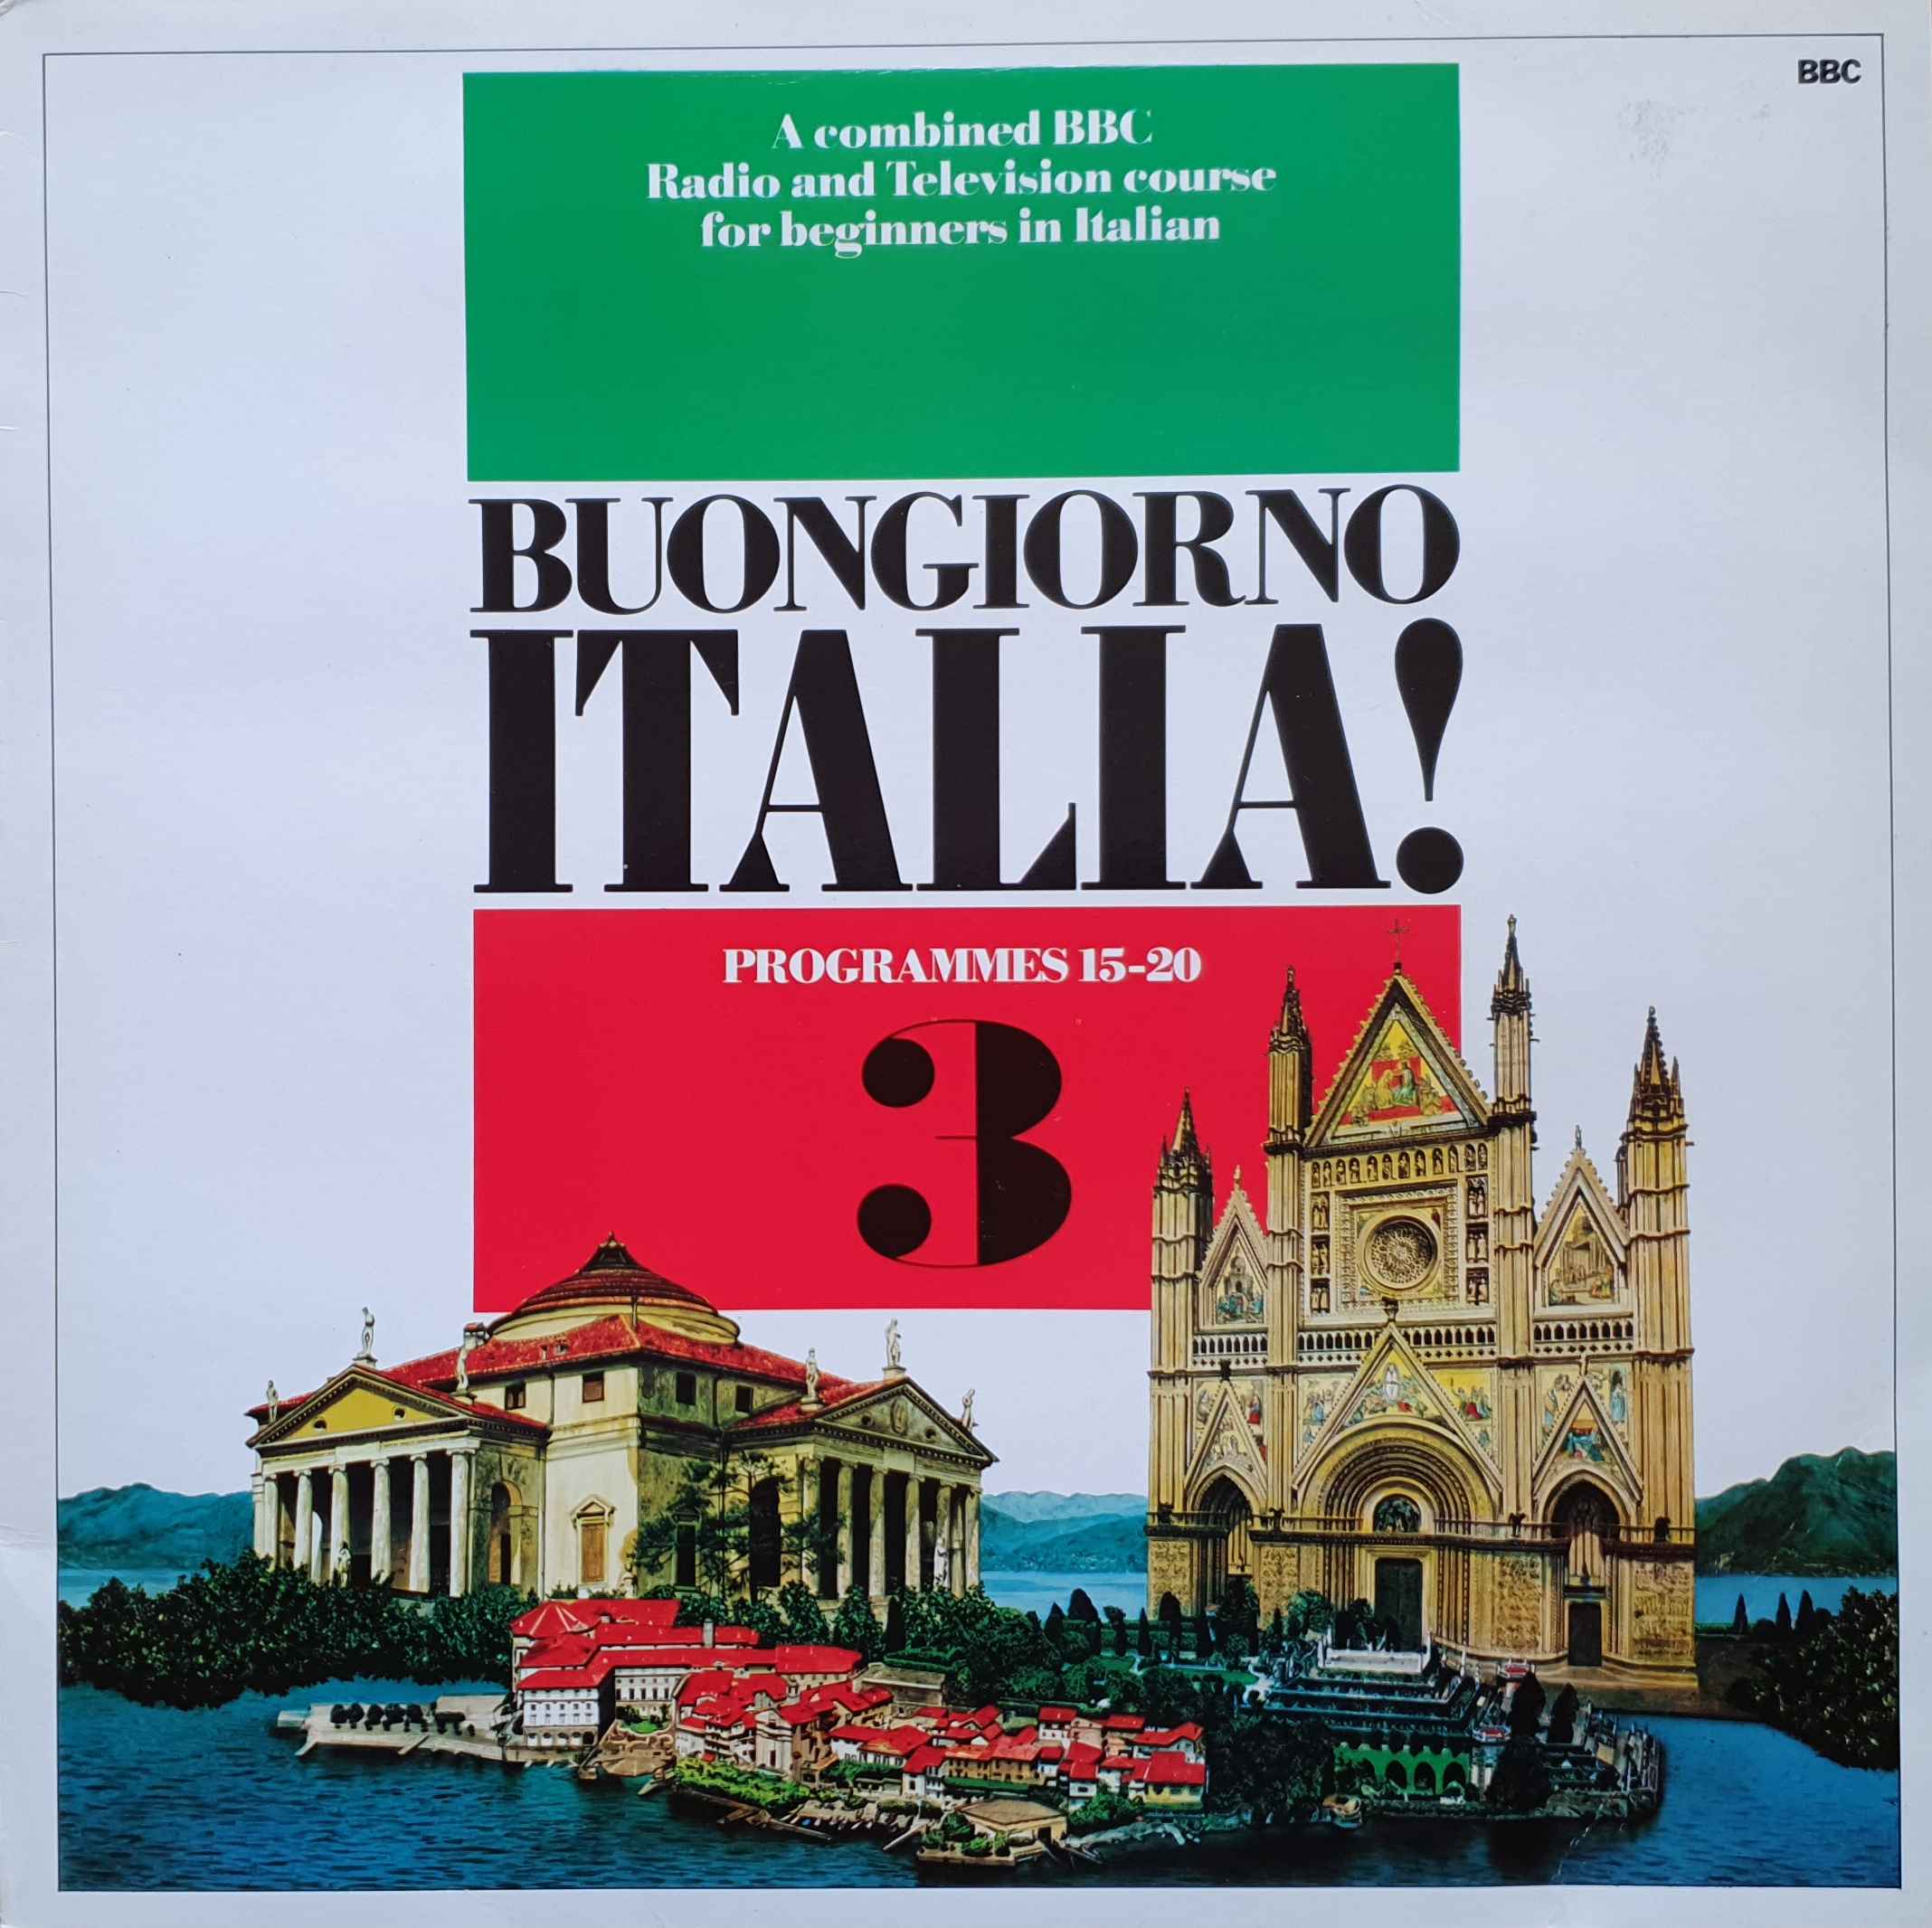 Picture of OP 262 Buongiorno Italia - 15-20 by artist Maddalena Fagandini / Antonietta Terry / Alan Wilding from the BBC albums - Records and Tapes library